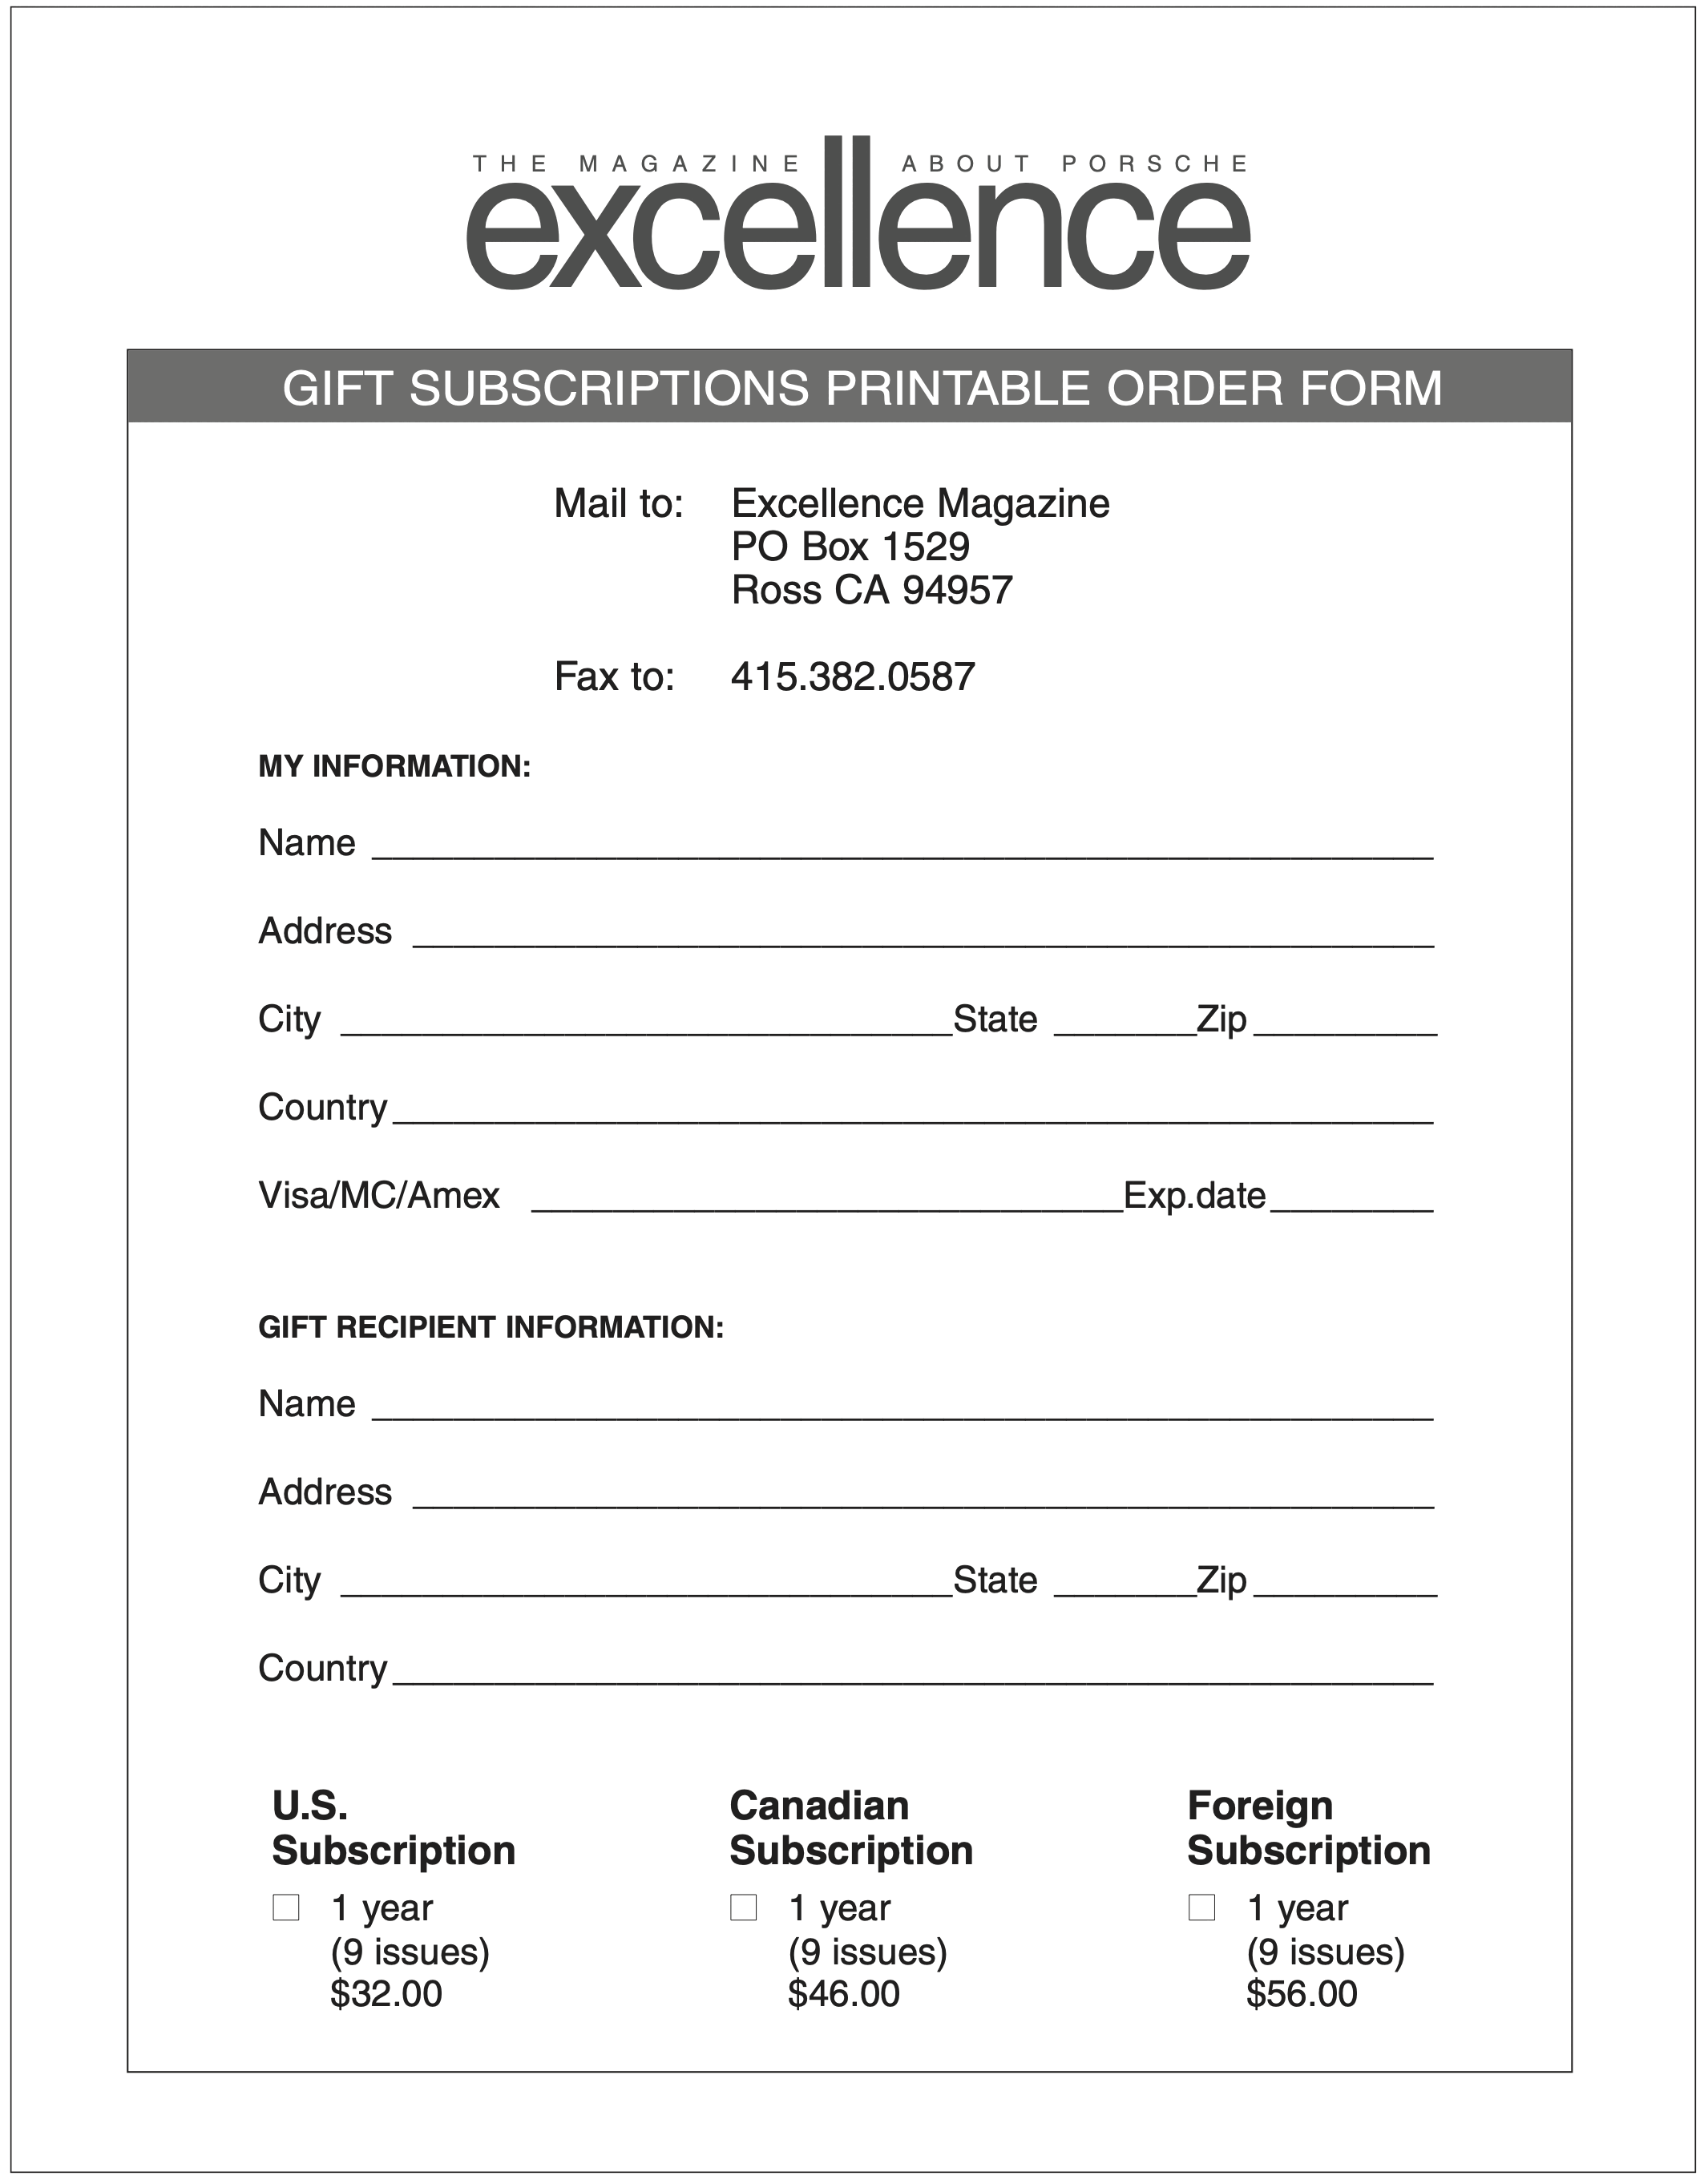 Excellence Gift Subscription Order Form